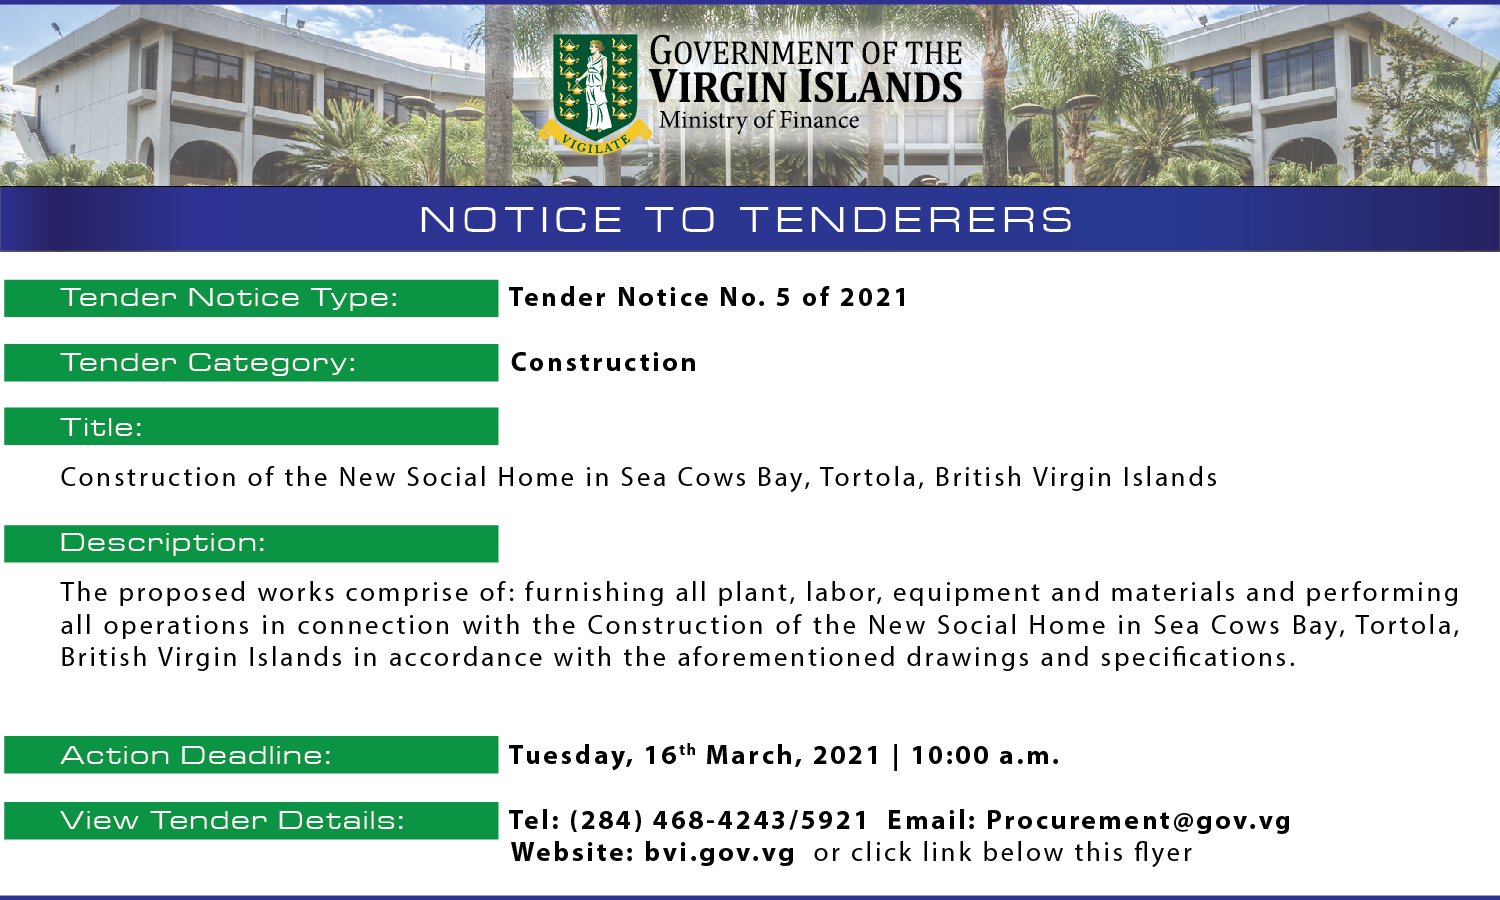 Tenders Invited For Construction Of New Social Home In Sea Cow’s Bay